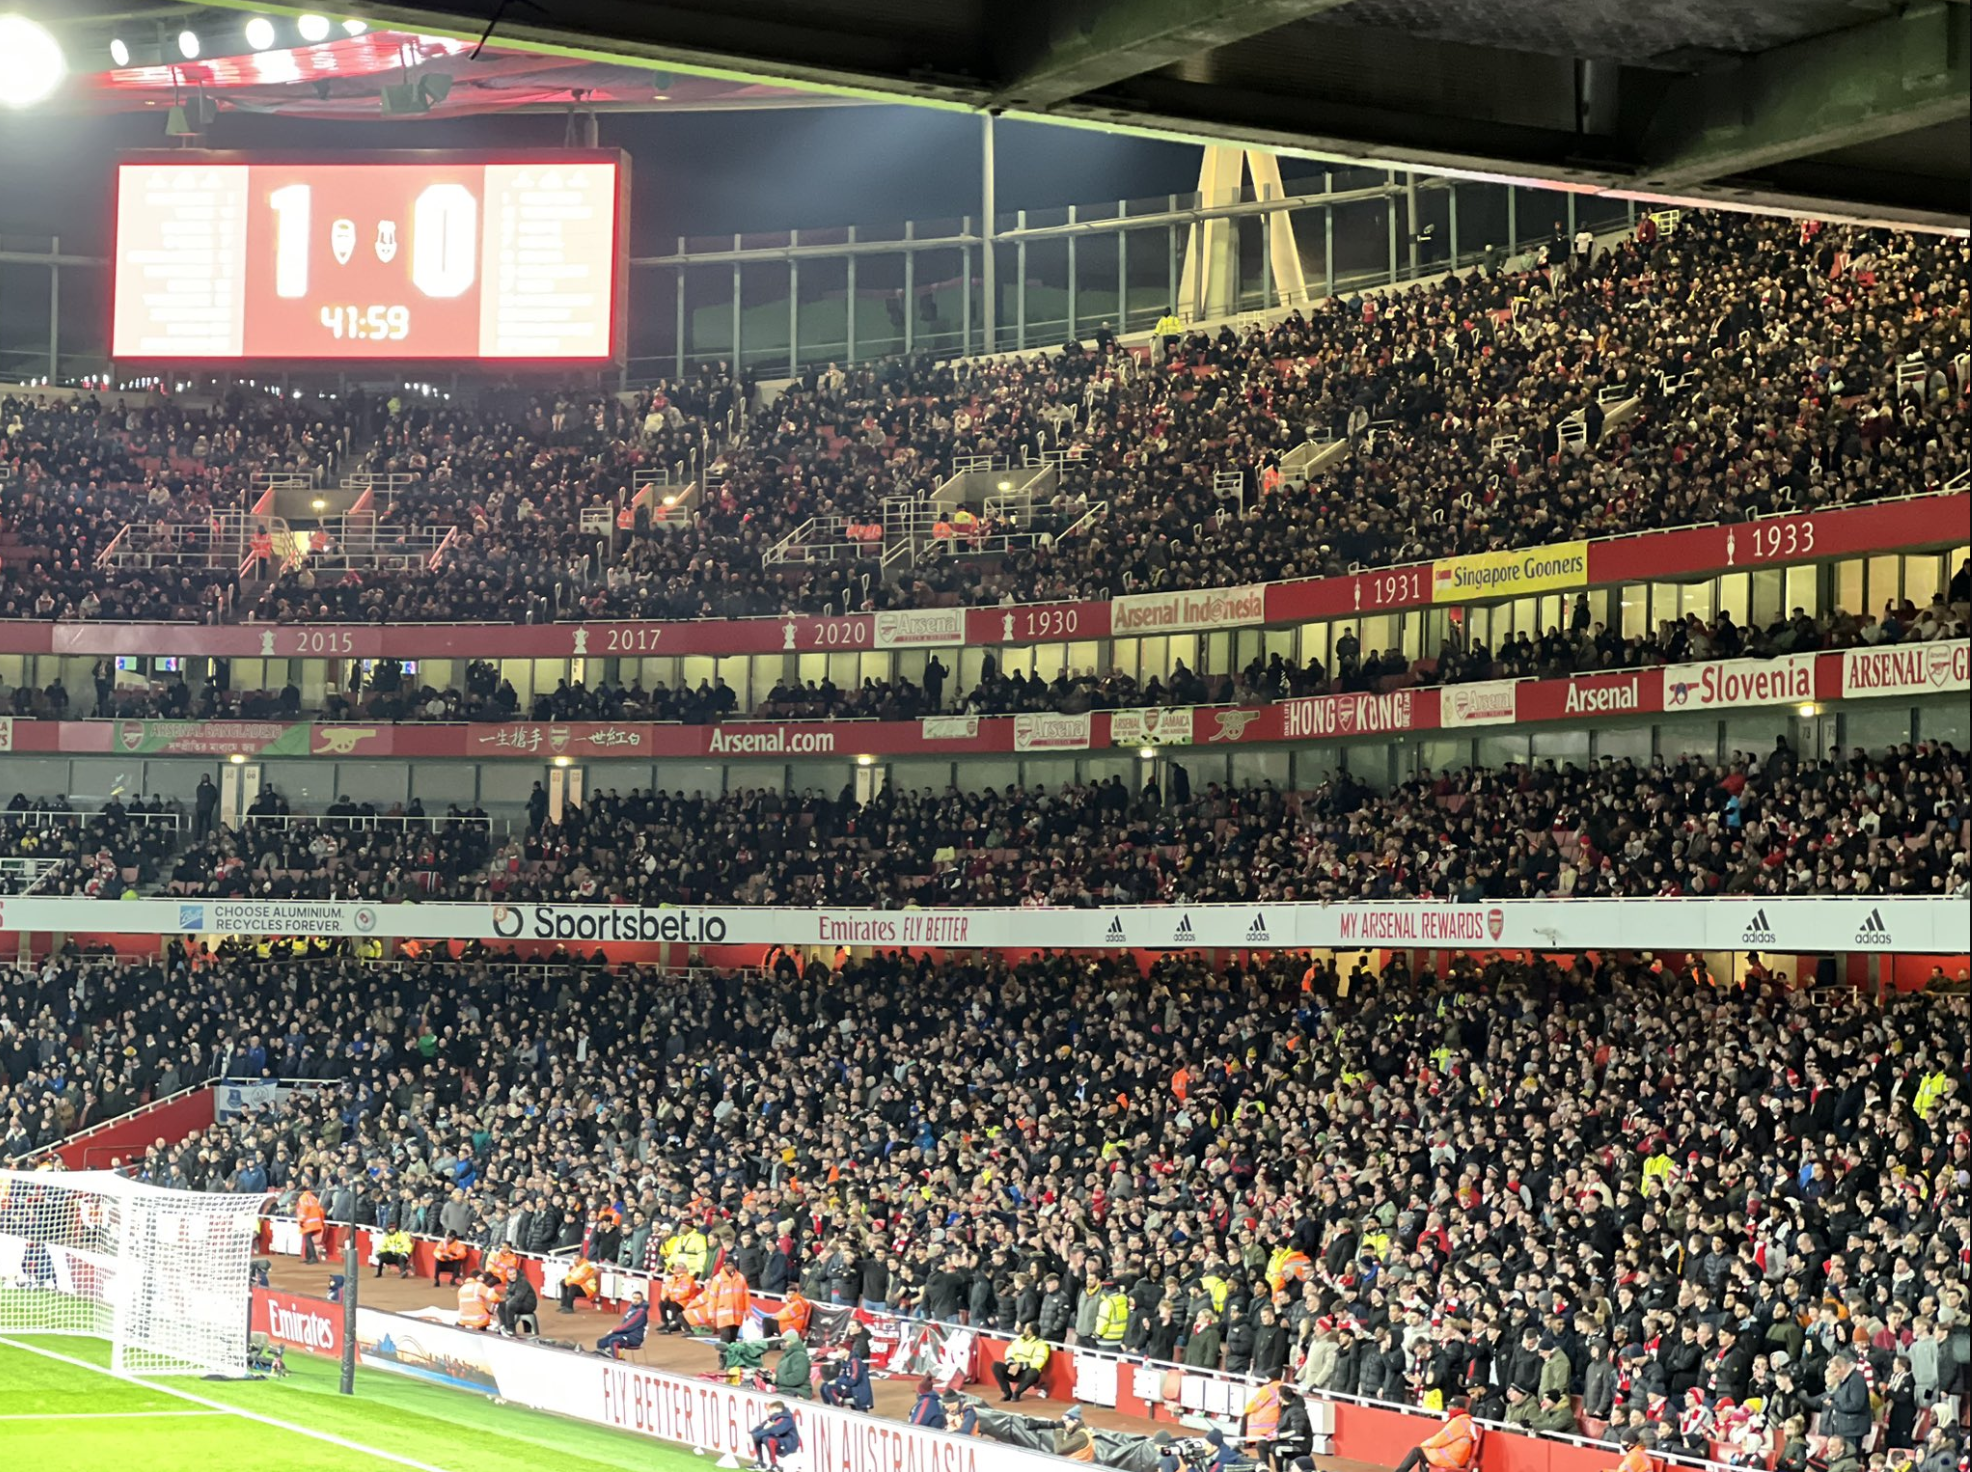 History is made as Arsenal Women sell out Emirates Stadium for Champions League semi final